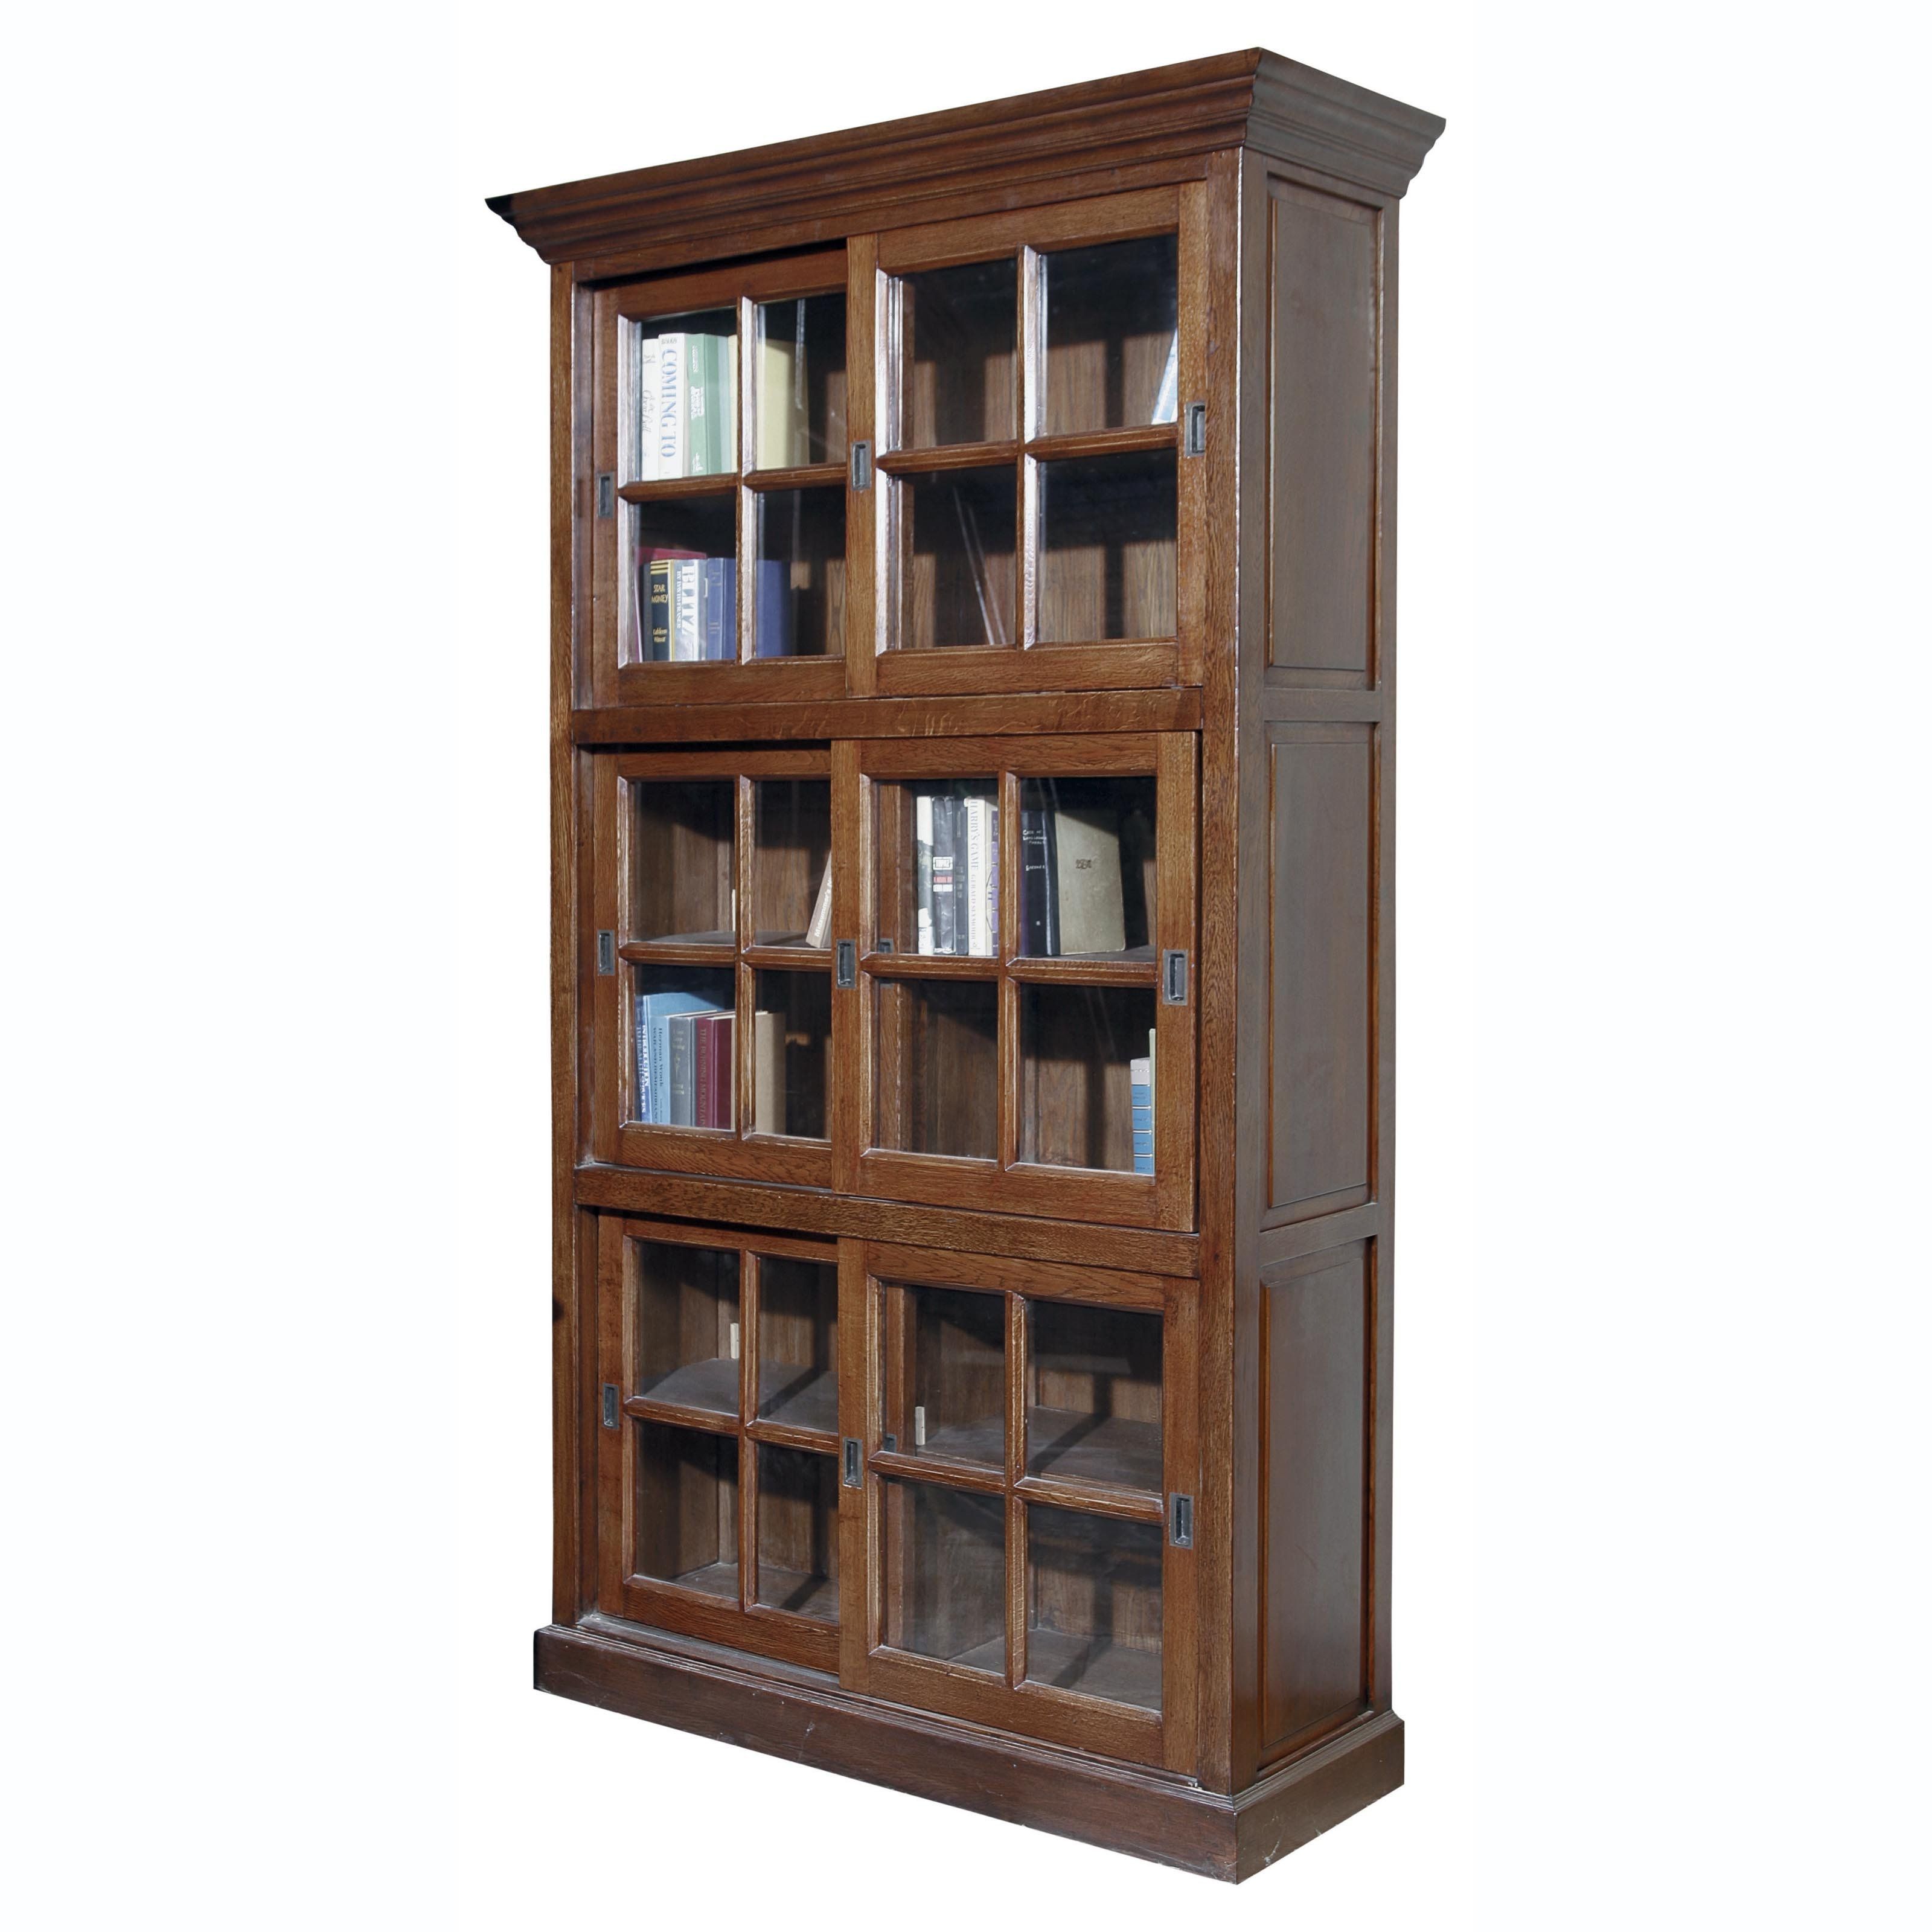 Bookshelf With Doors Armoire With Open Shelves And Magnetic Doors Regarding Large Solid Wood Bookcase (View 12 of 15)